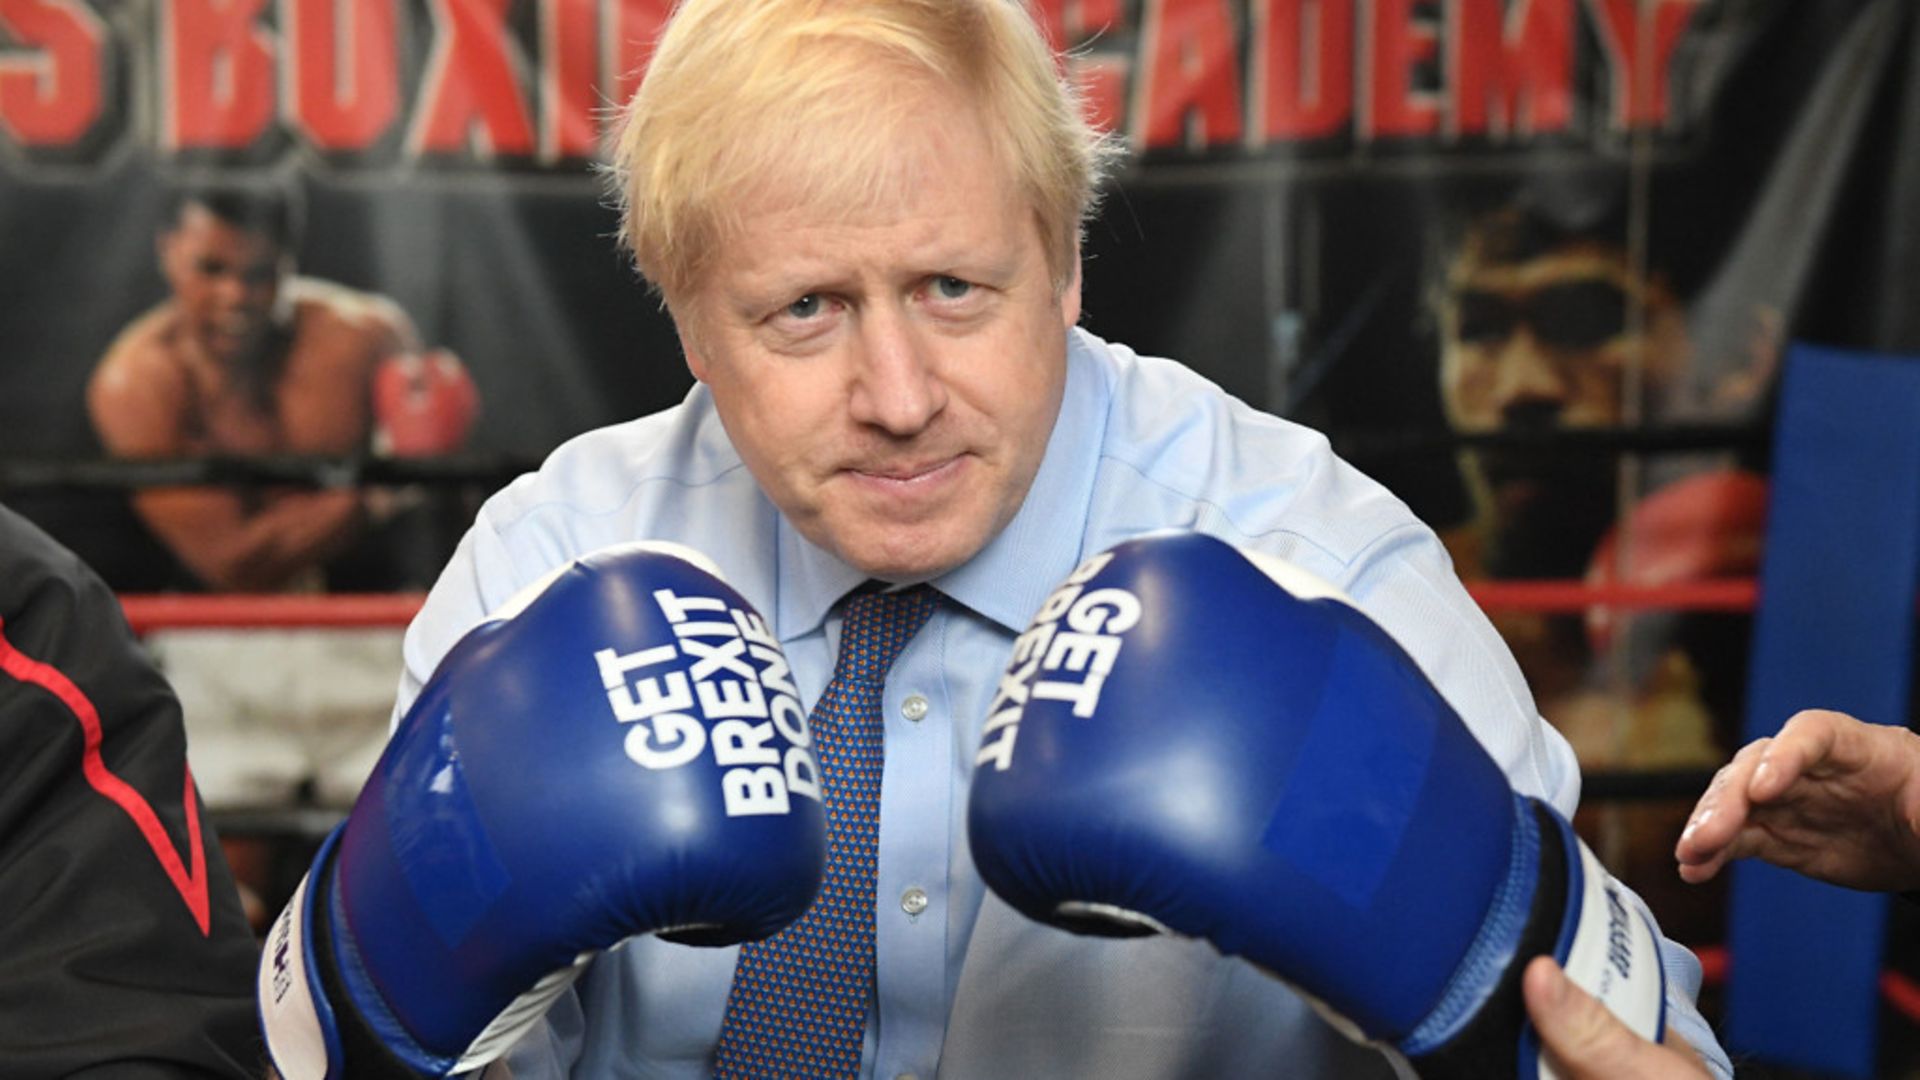 Boris Johnson in 'get Brexit done' gloves - Credit: PA